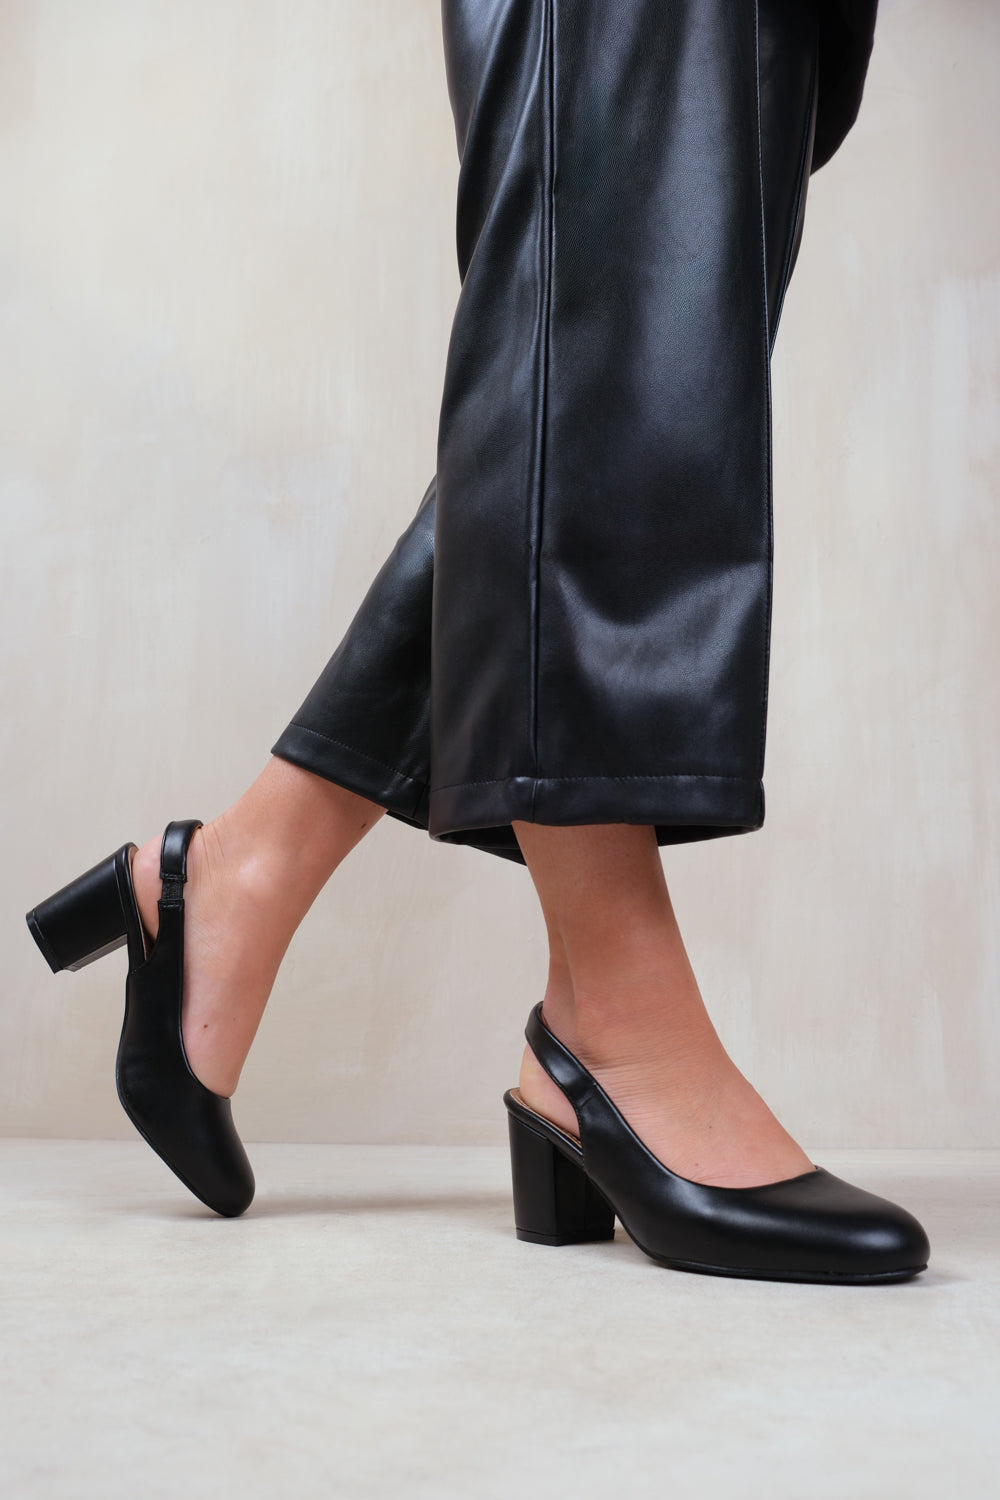 EDITH BLOCK HEEL SLINGBACK SHOES IN BLACK FAUX LEATHER